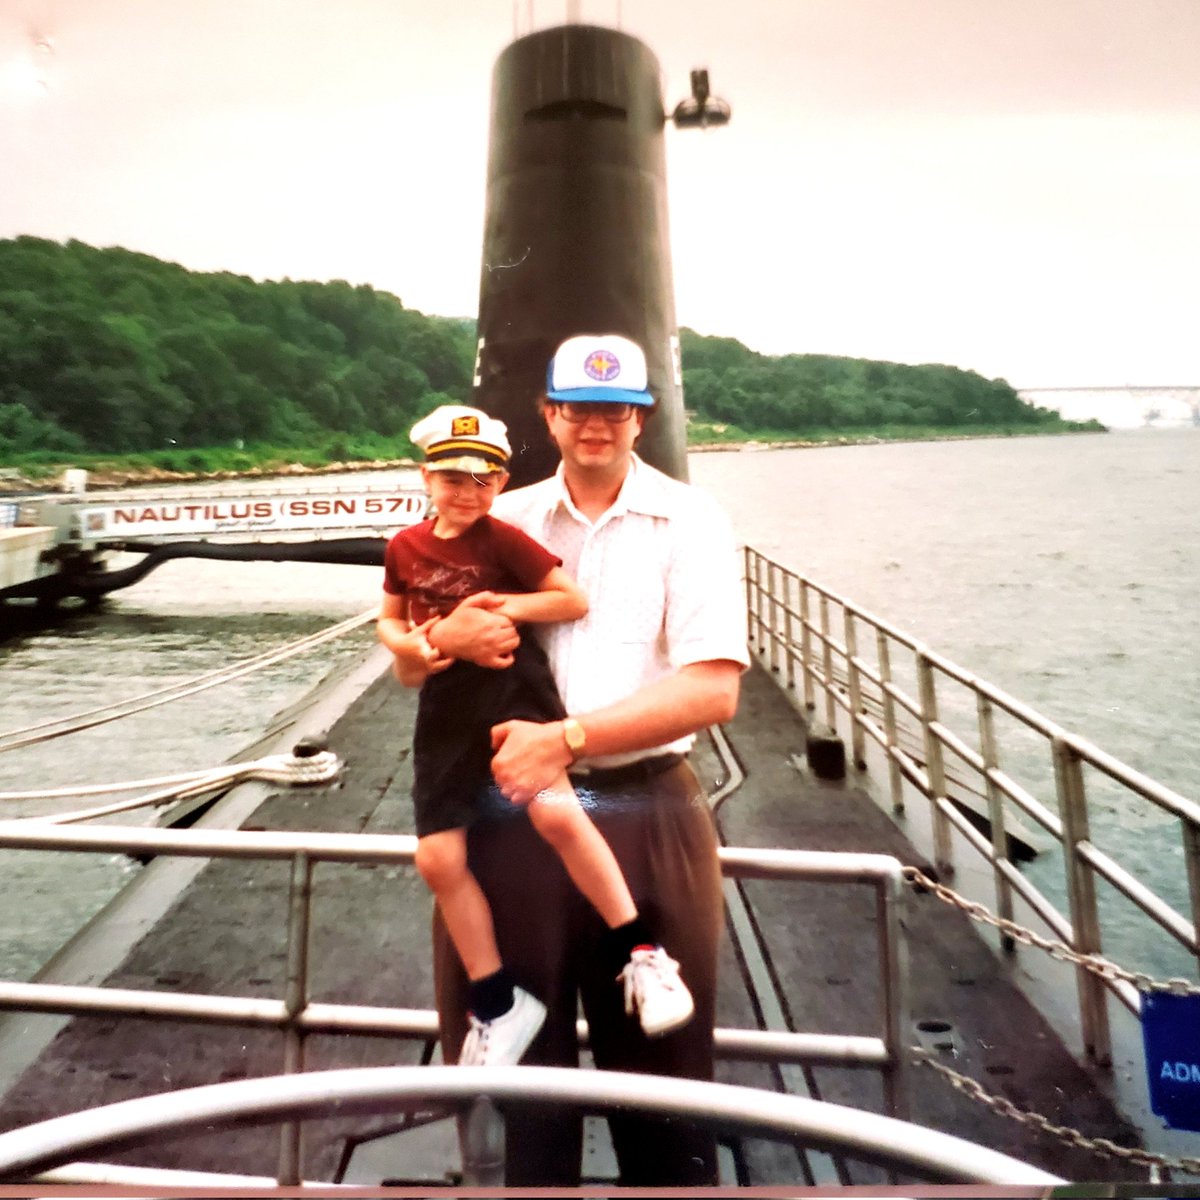 Quote with a pic of a much younger you. My dad and I visiting the USS Nautilus, July 1994. I remember the day clearly! The world's first operational nuclear-powered submarine.